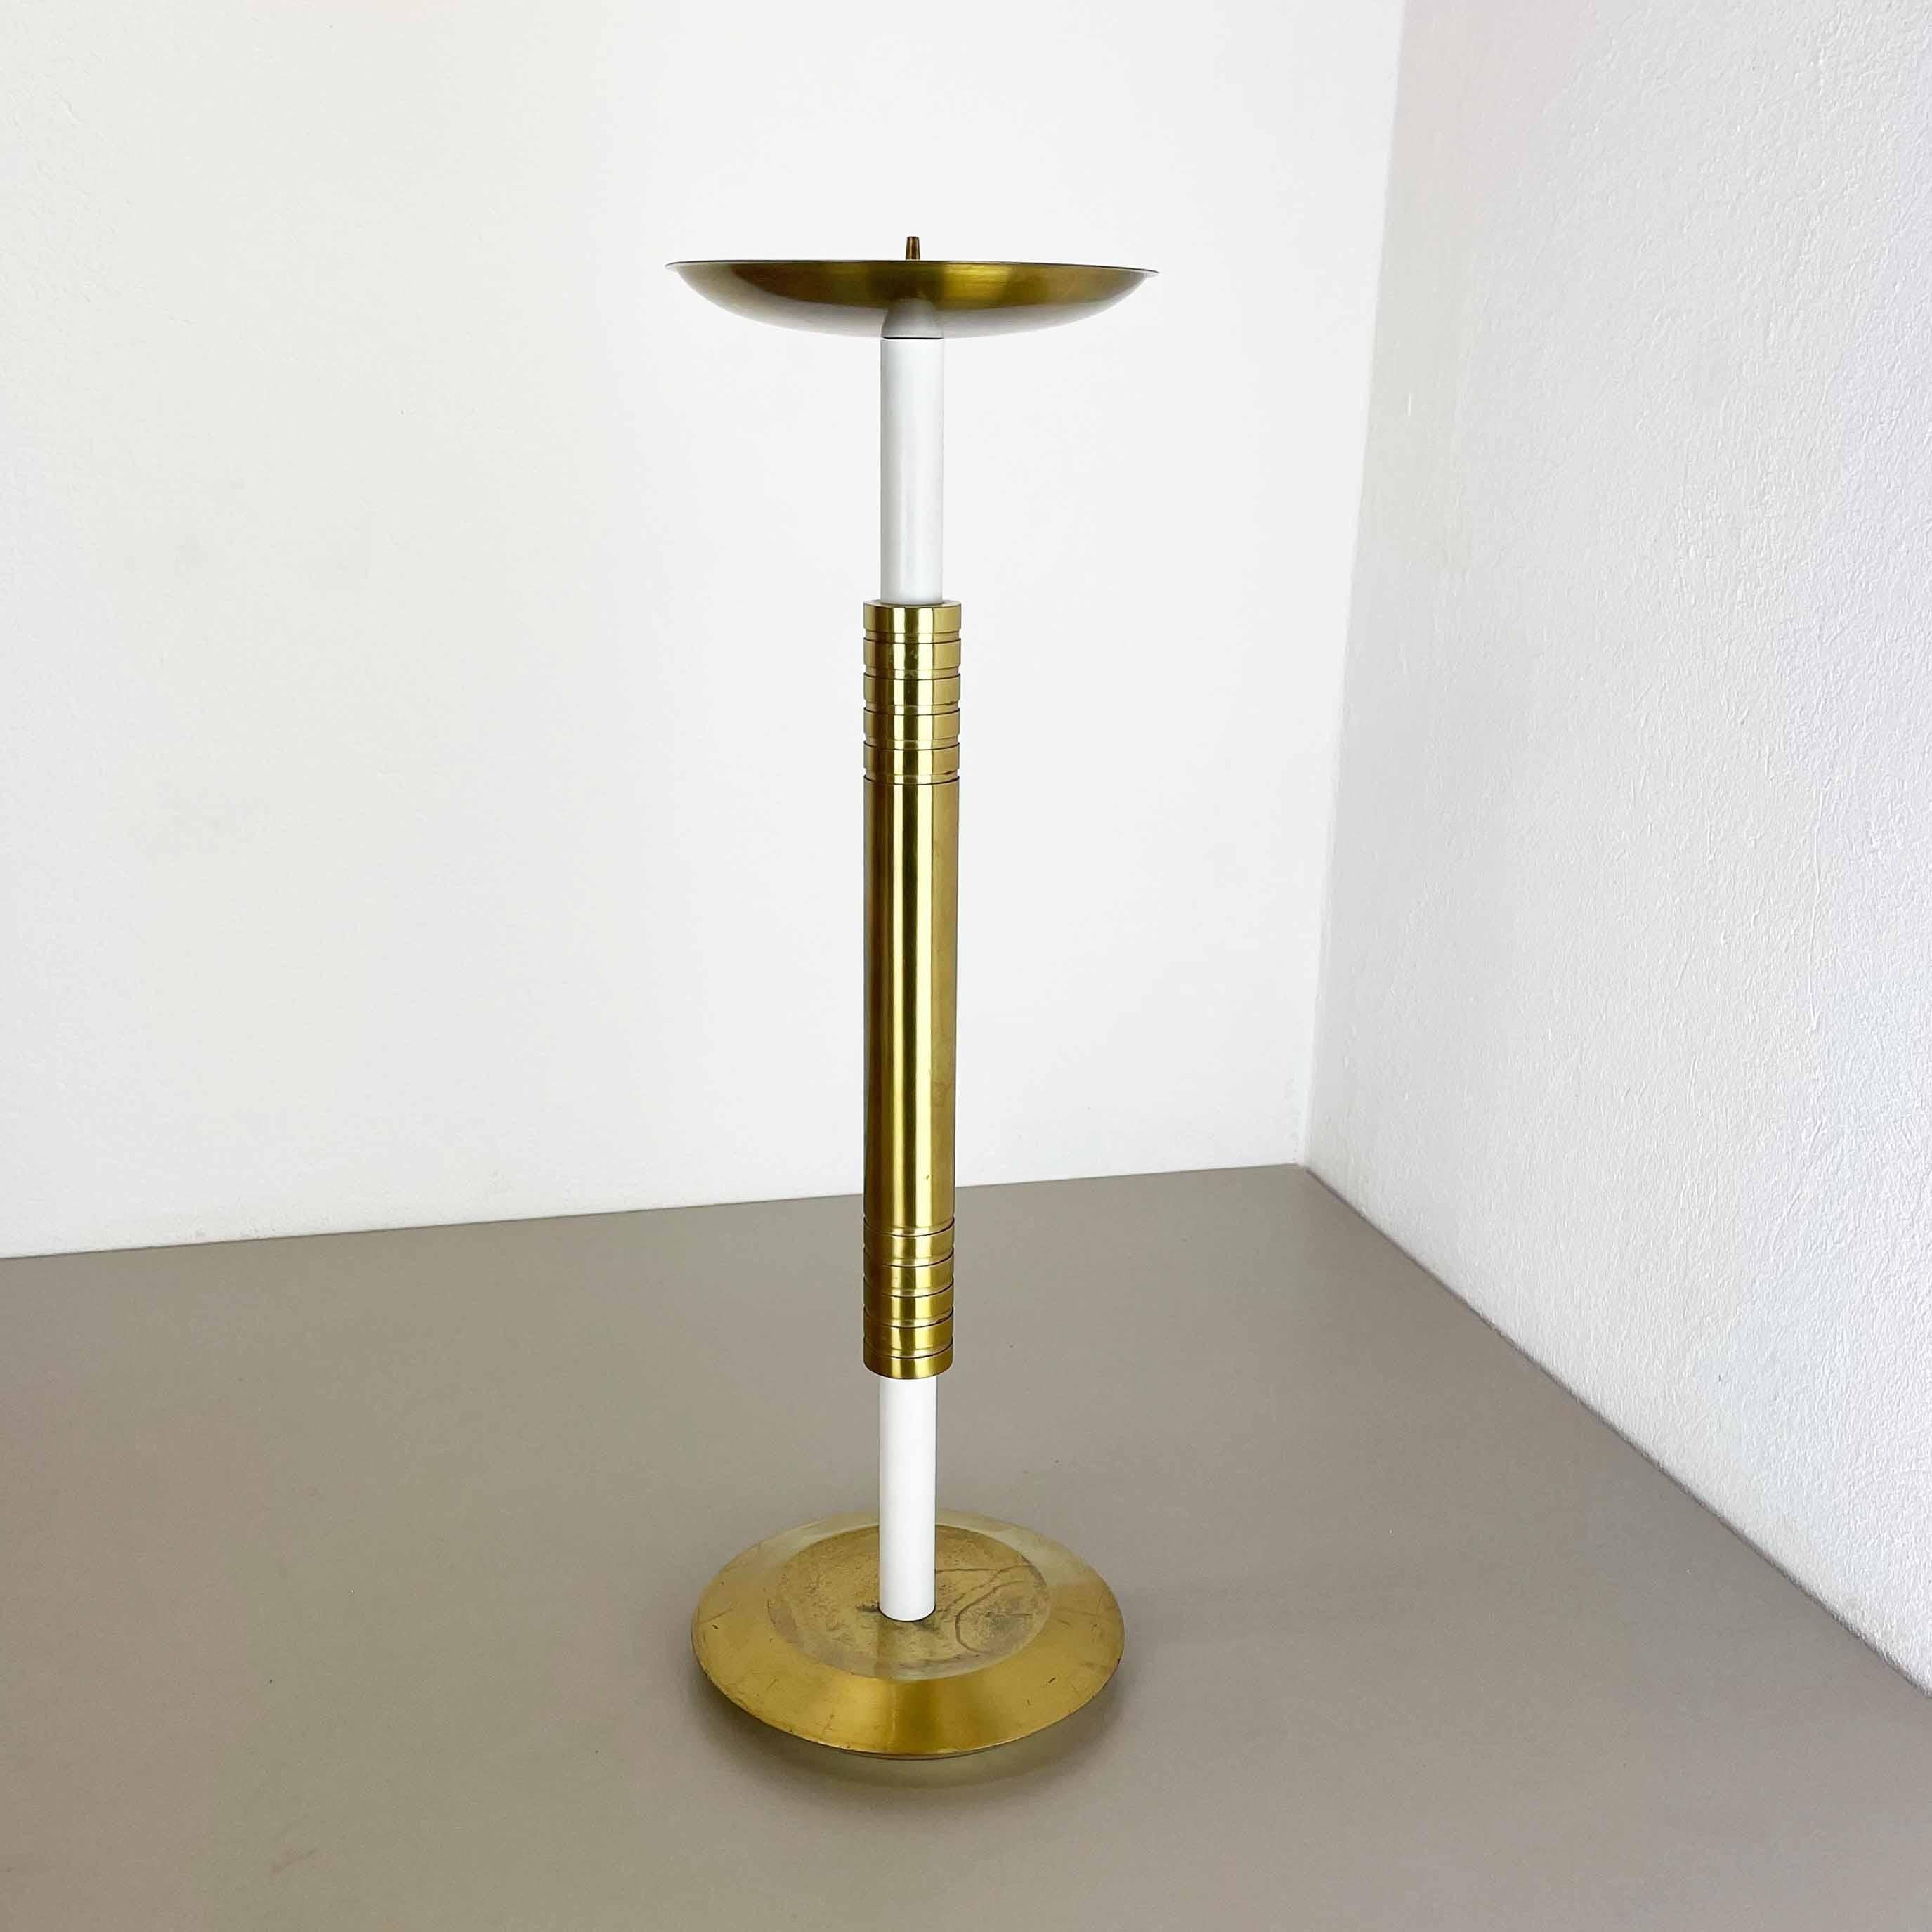 Article: Brutalist floor candleholder

Origin: Italy

Material: brass and metal (white tube stand)

Decade: 1950s

Description: This original vintage candleholder, was produced in the 1950s in Italy. it is made of solid brass and metal, and